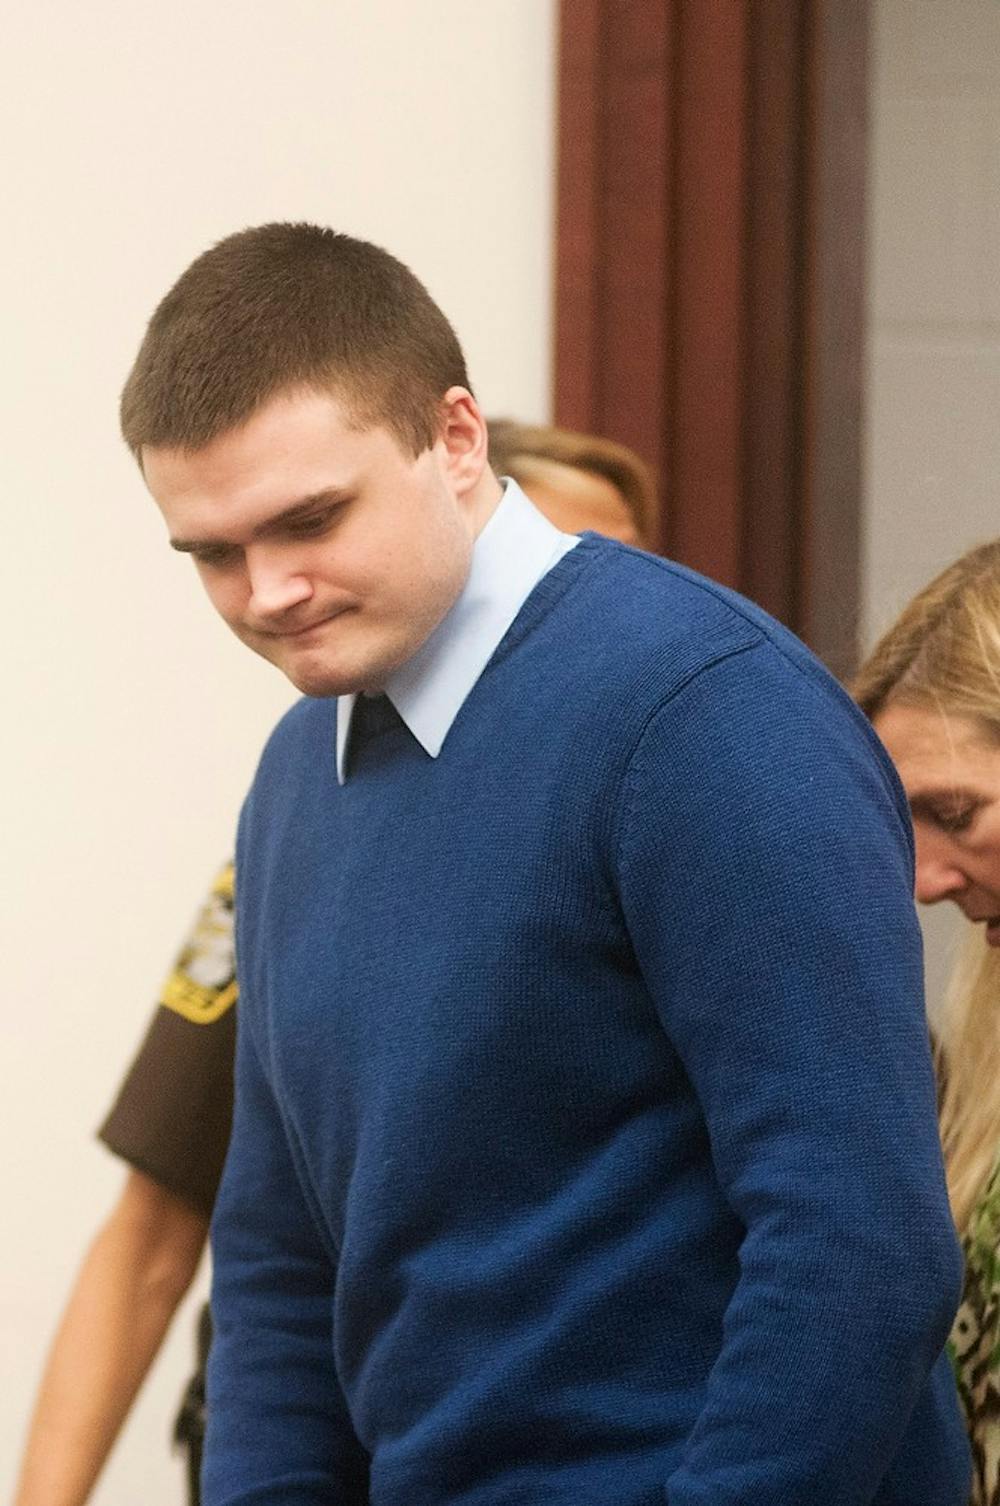 	<p>Connor McCowan enters the courtroom Oct. 15 before the verdict at Ingham County County Circuit Court in Lansing. McCowan was found guilty of the Feb. 23 stabbing of <span class="caps">MSU</span> student Andrew Singler. Georgina De Moya/The State News</p>